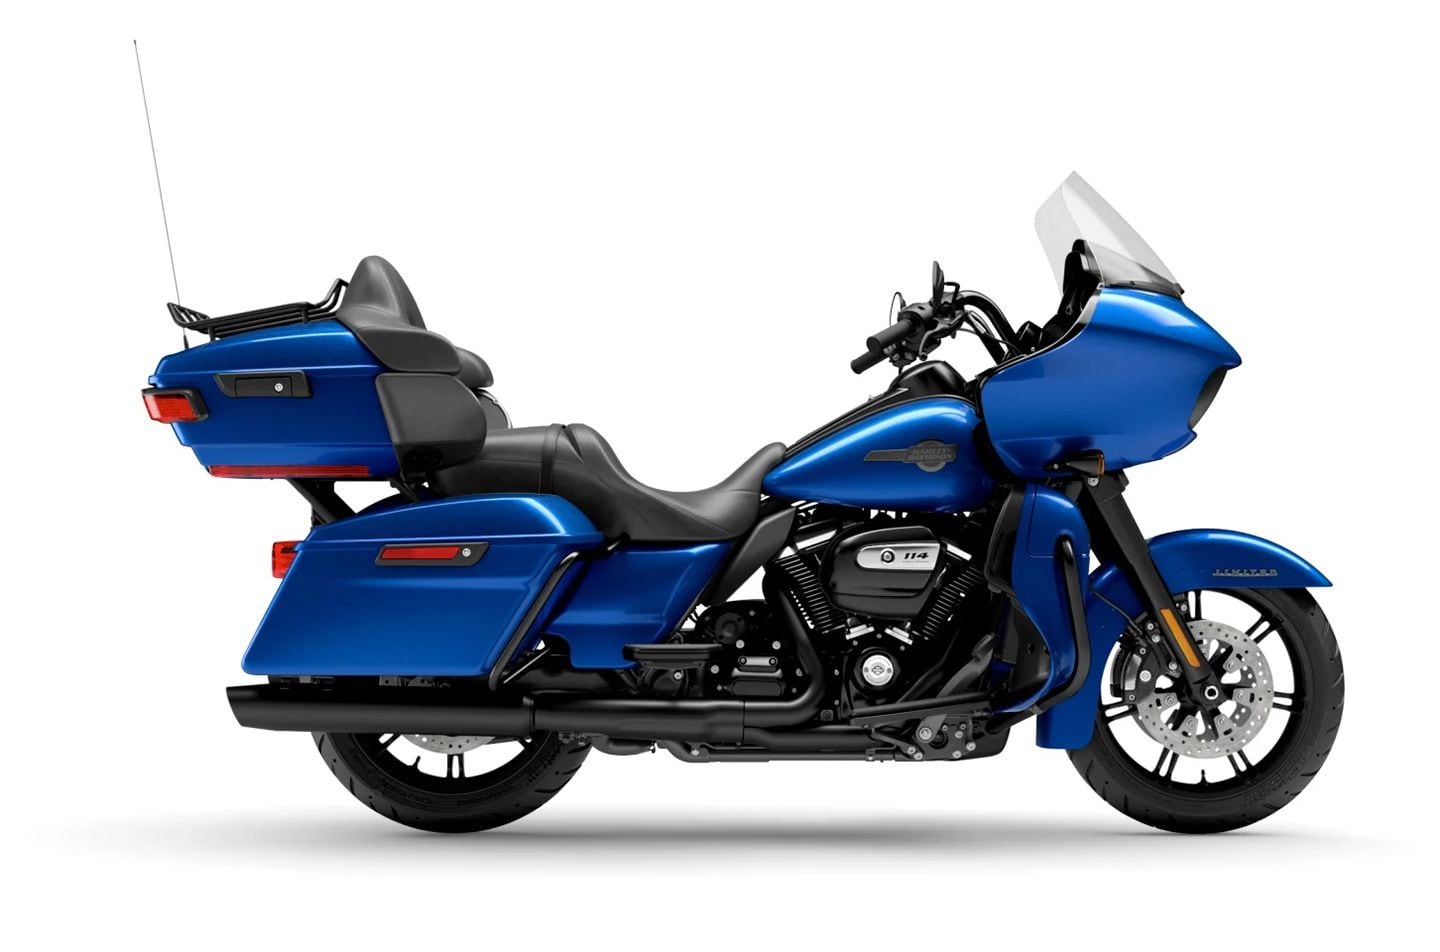 The Road Glide Limited returns for 2024 still packing the M-8 114 engine, and seeing no changes to its frame-mounted sharknose fairing—or anything else. This Blue Burst color option shown adds $1,000 to the $32,499 MSRP.